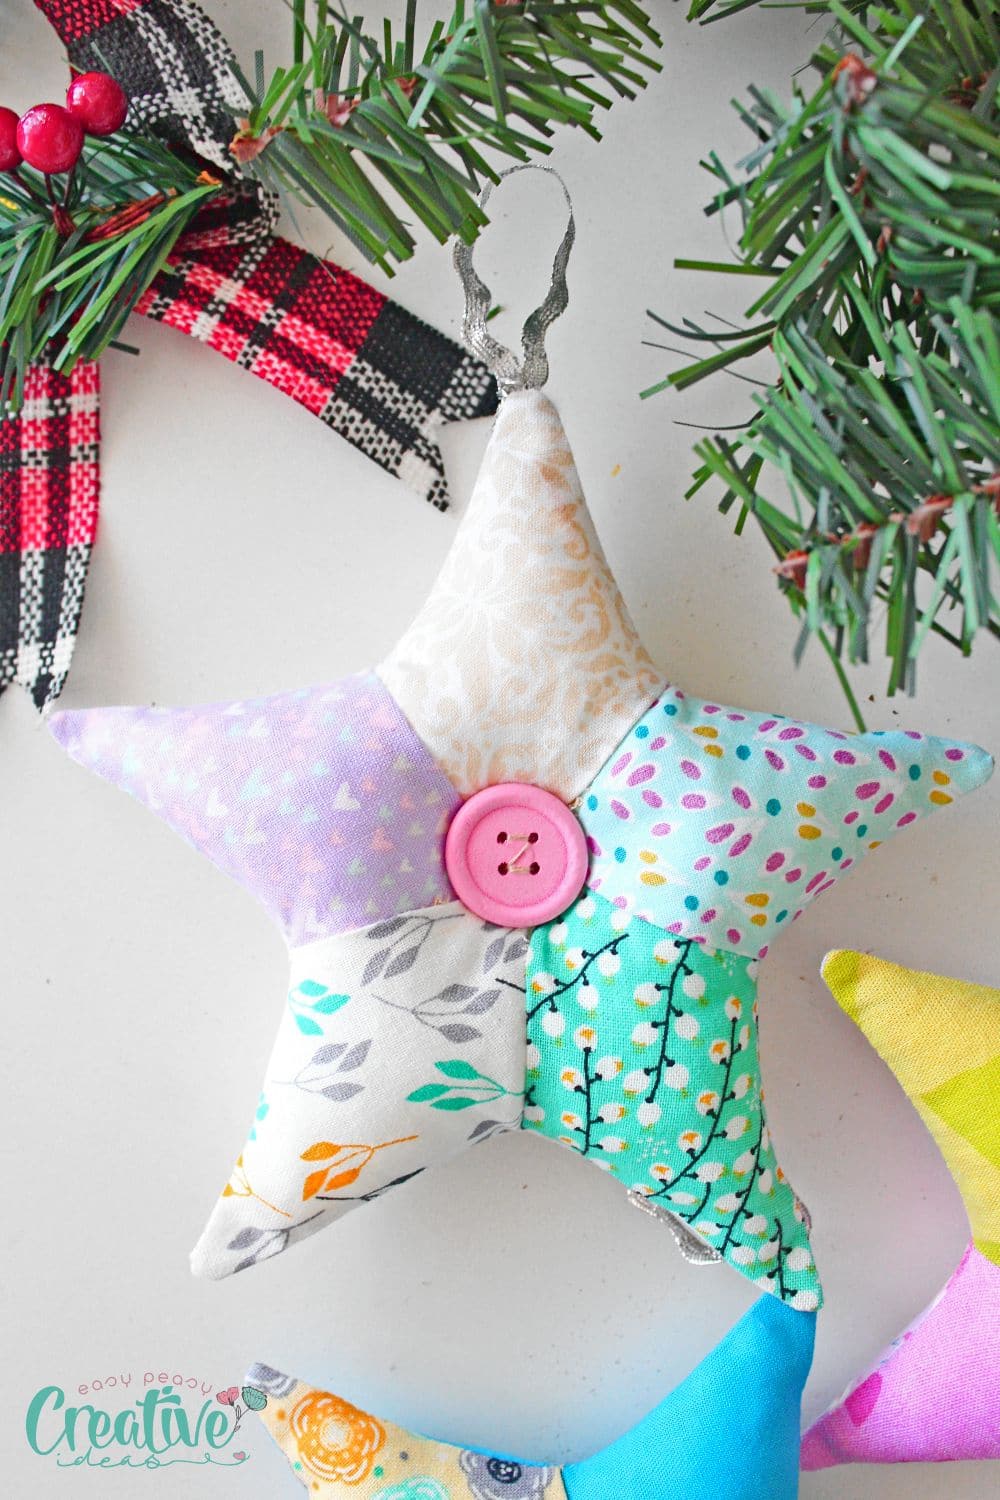 Patchwork star ornament sewn with a Christmas star pattern